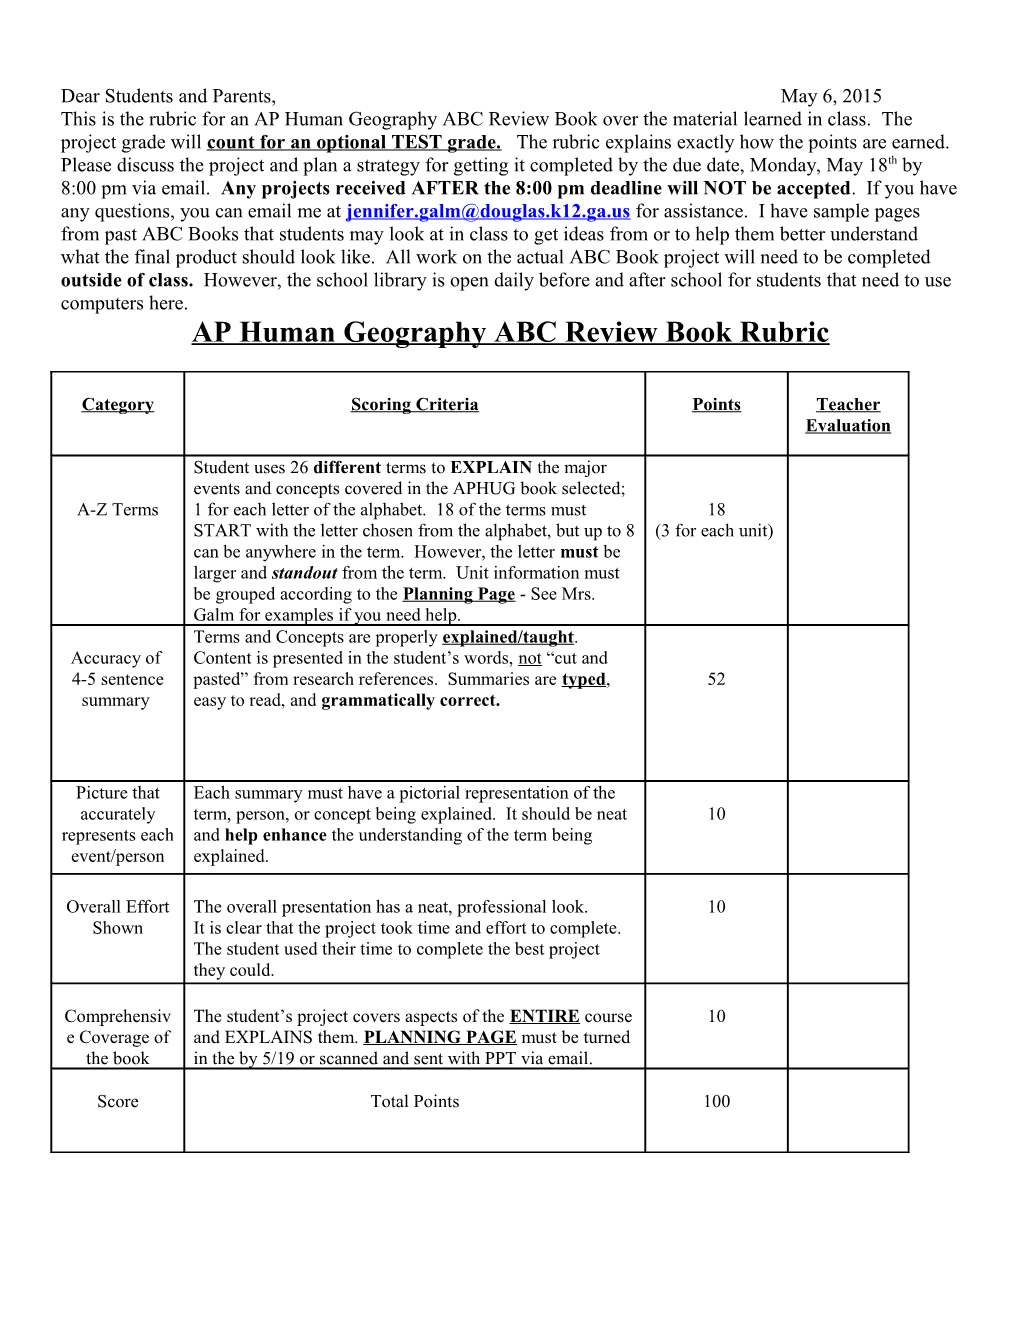 Power Point Review Rubric